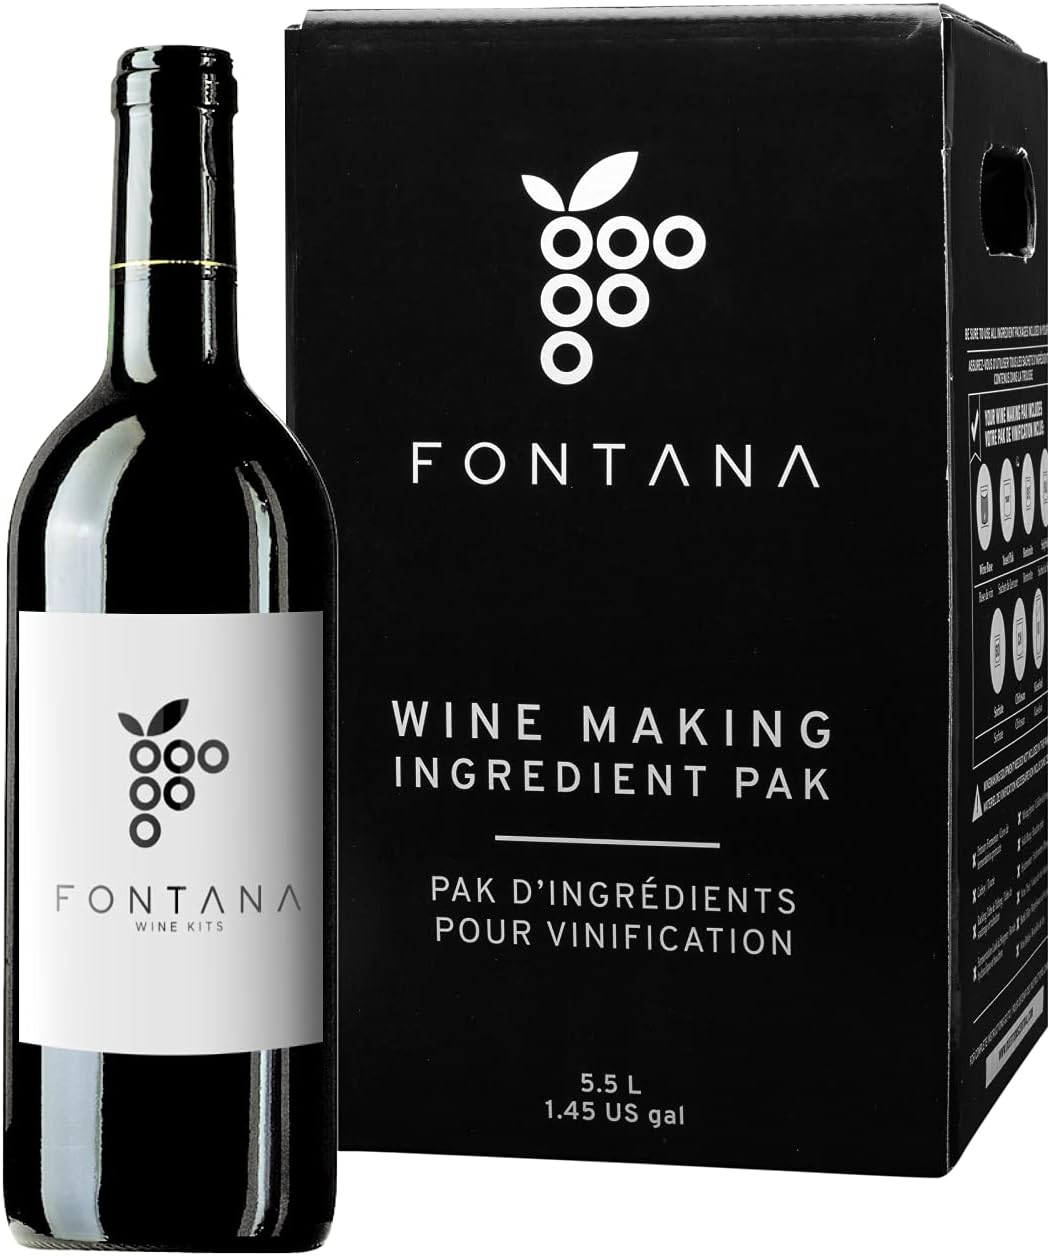 Fontana California Shiraz Wine Kit: The Ultimate Wine Making Experience at Home - A Product Review